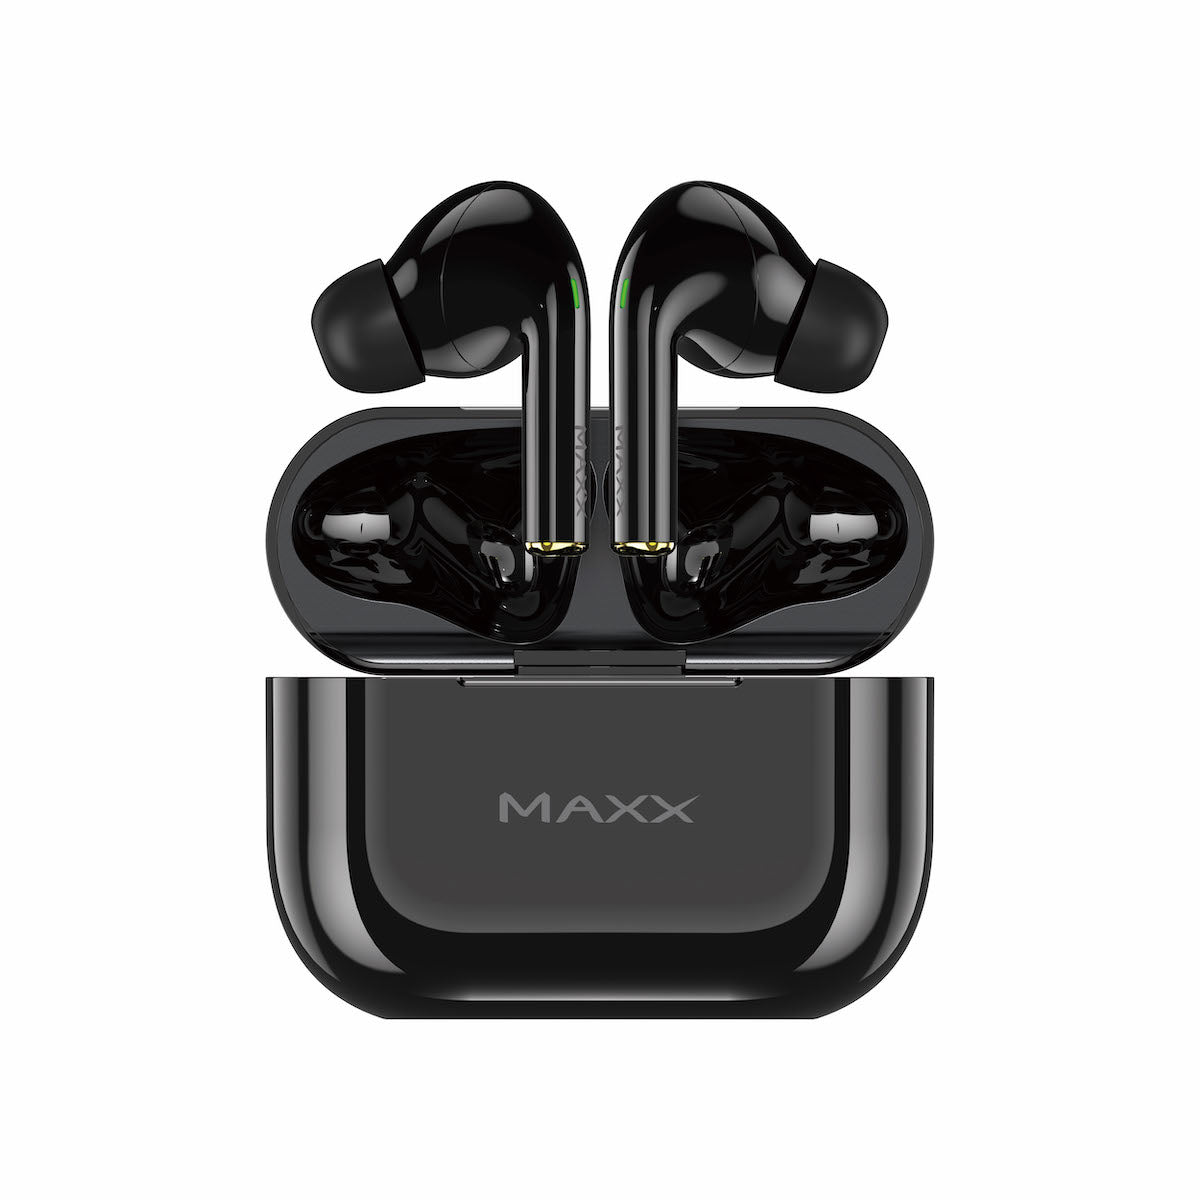 earbuds with good bass and noise cancellation